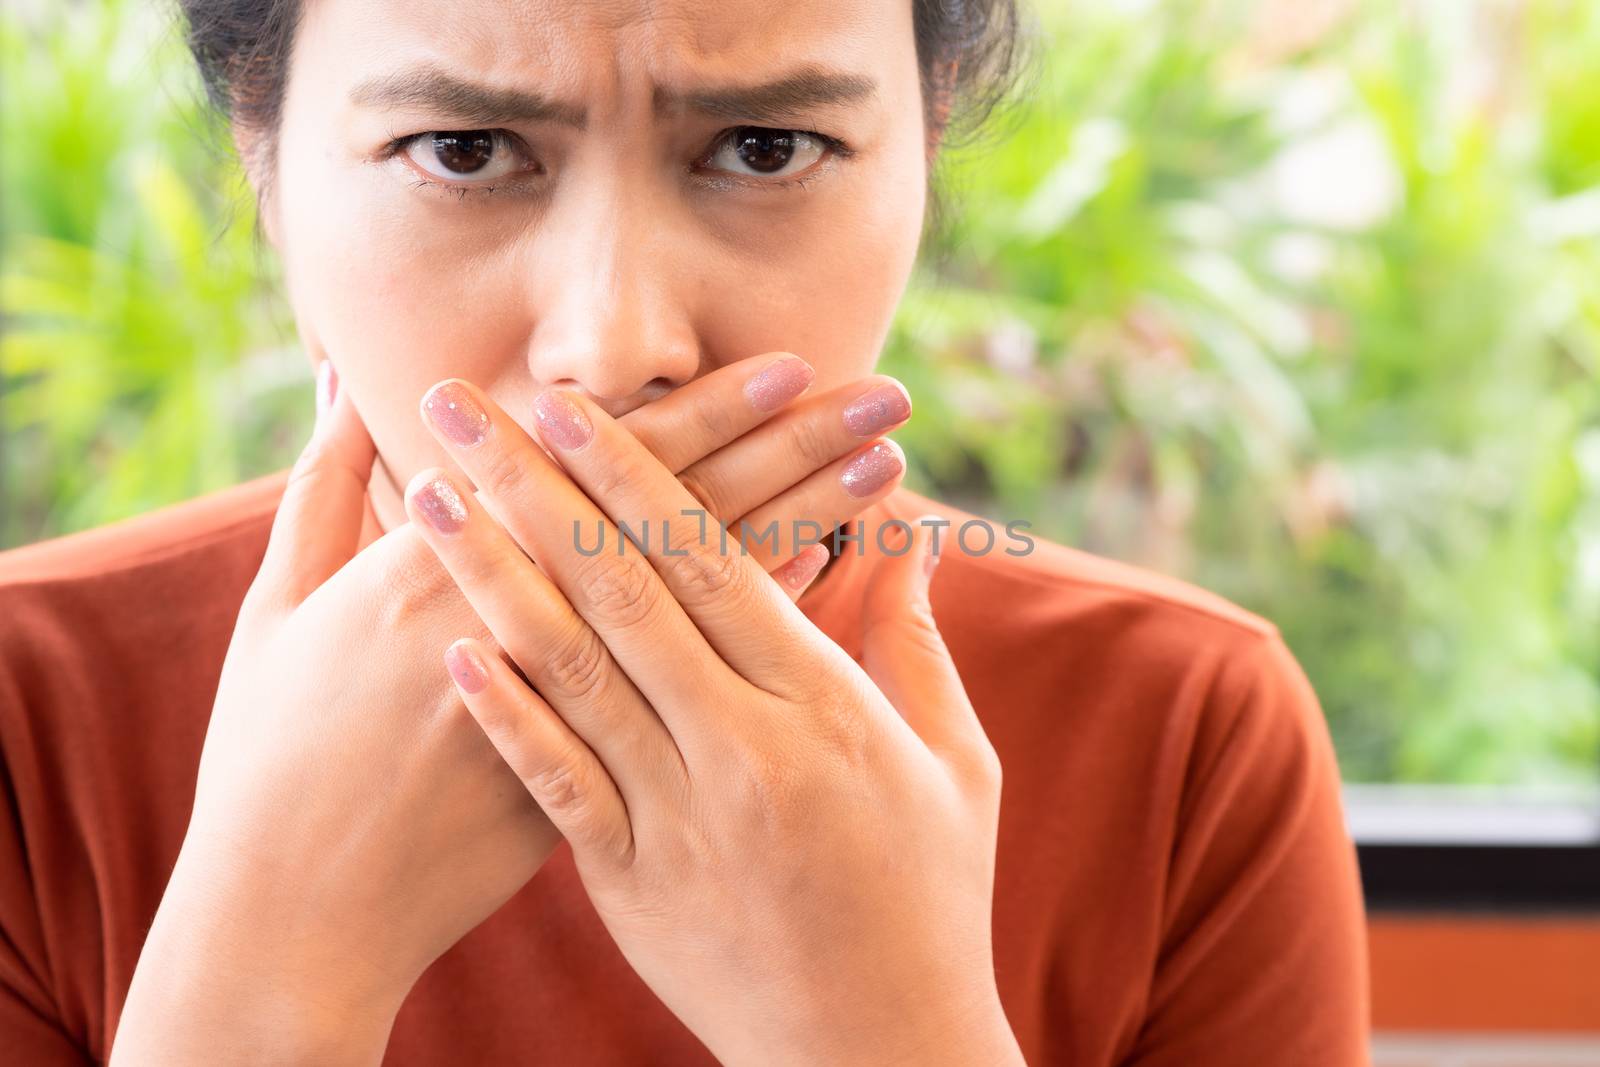 Woman with bad breath covering mouth, halitosis concept by psodaz